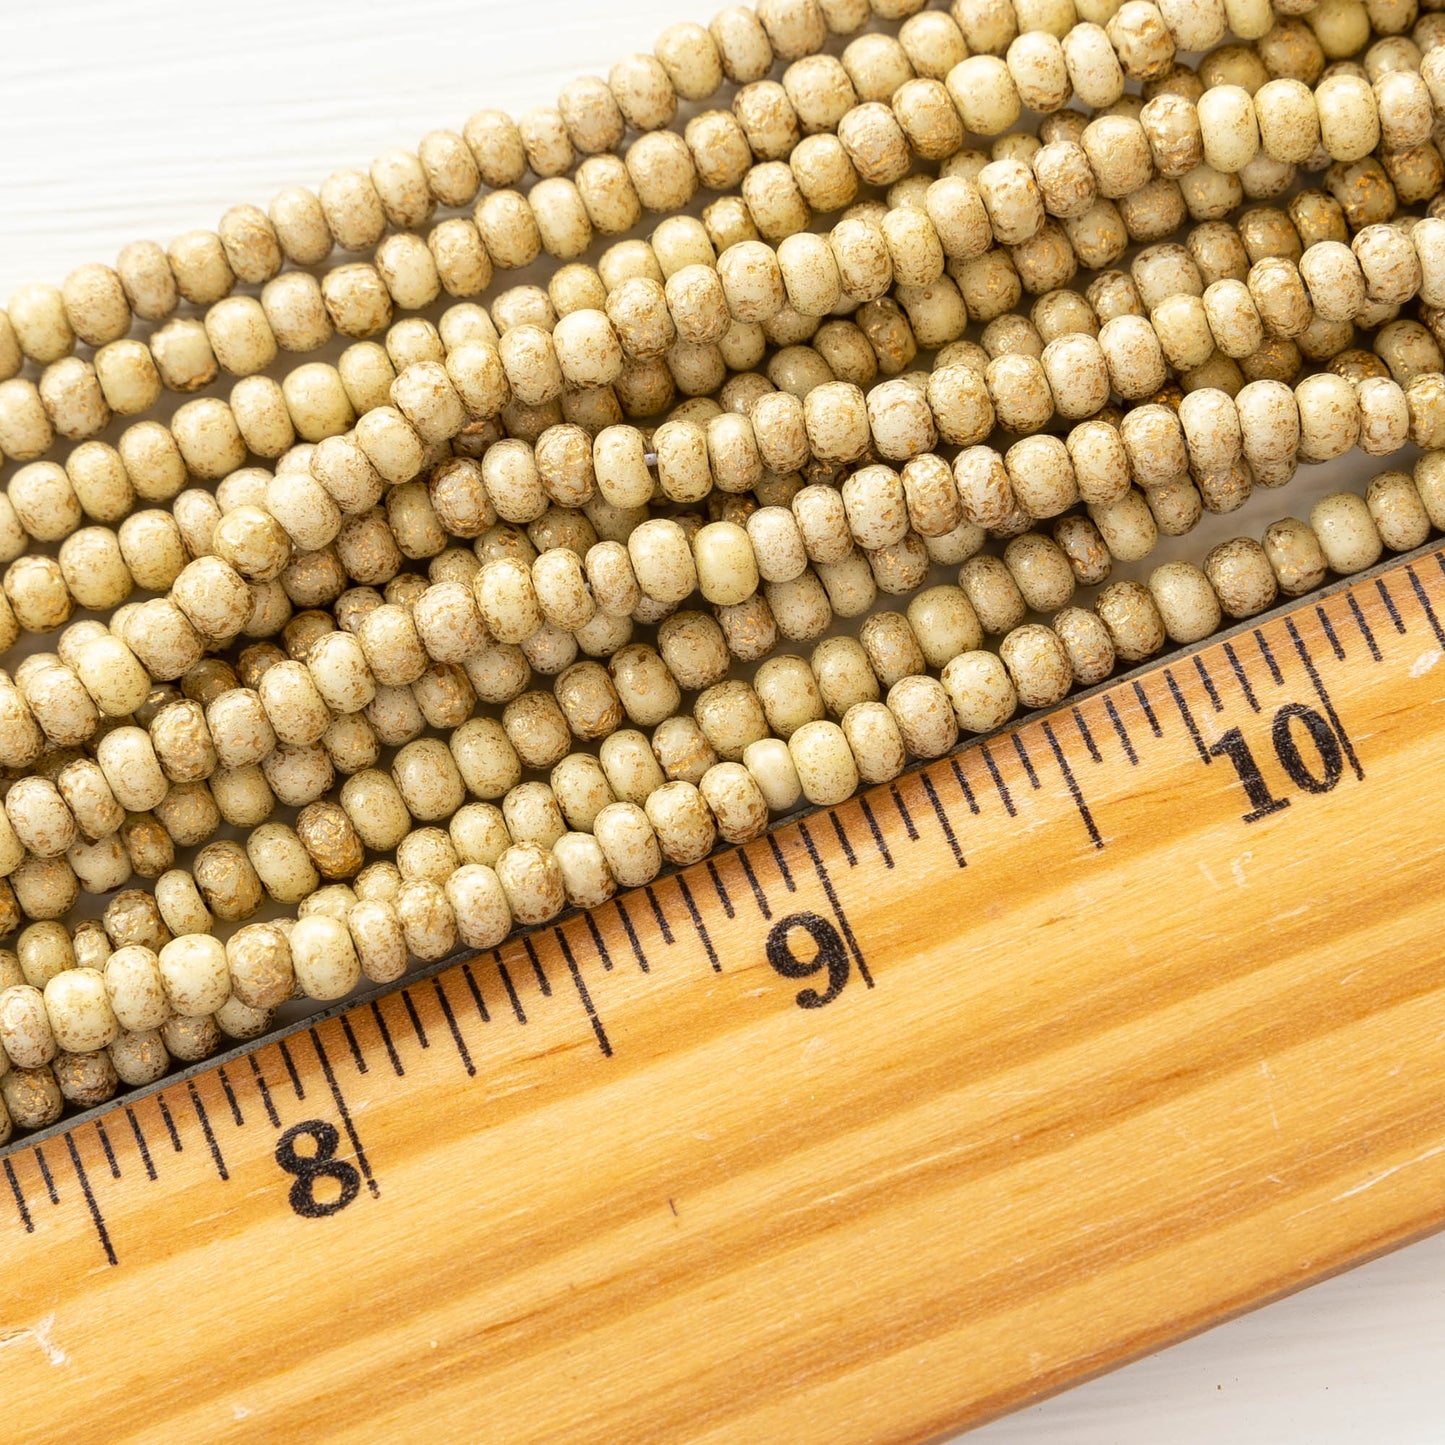 Size 6 Seed Beads - Opaque Ivory with Gold Dust - Choose Amount